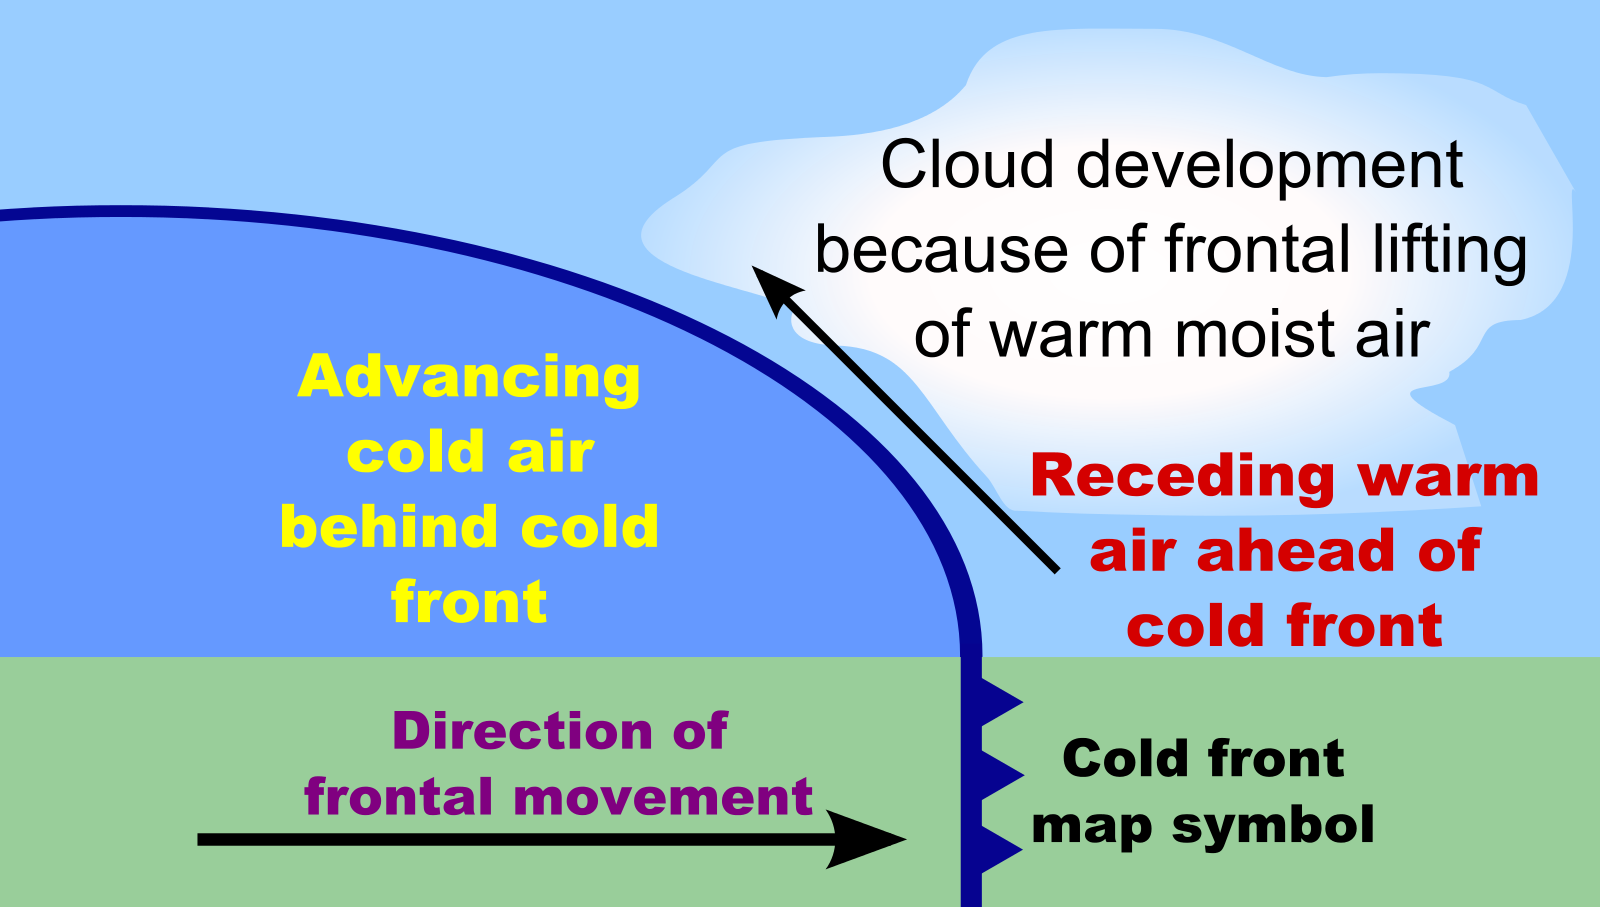 A schematic cross section of a cold front. A heighthorizontal